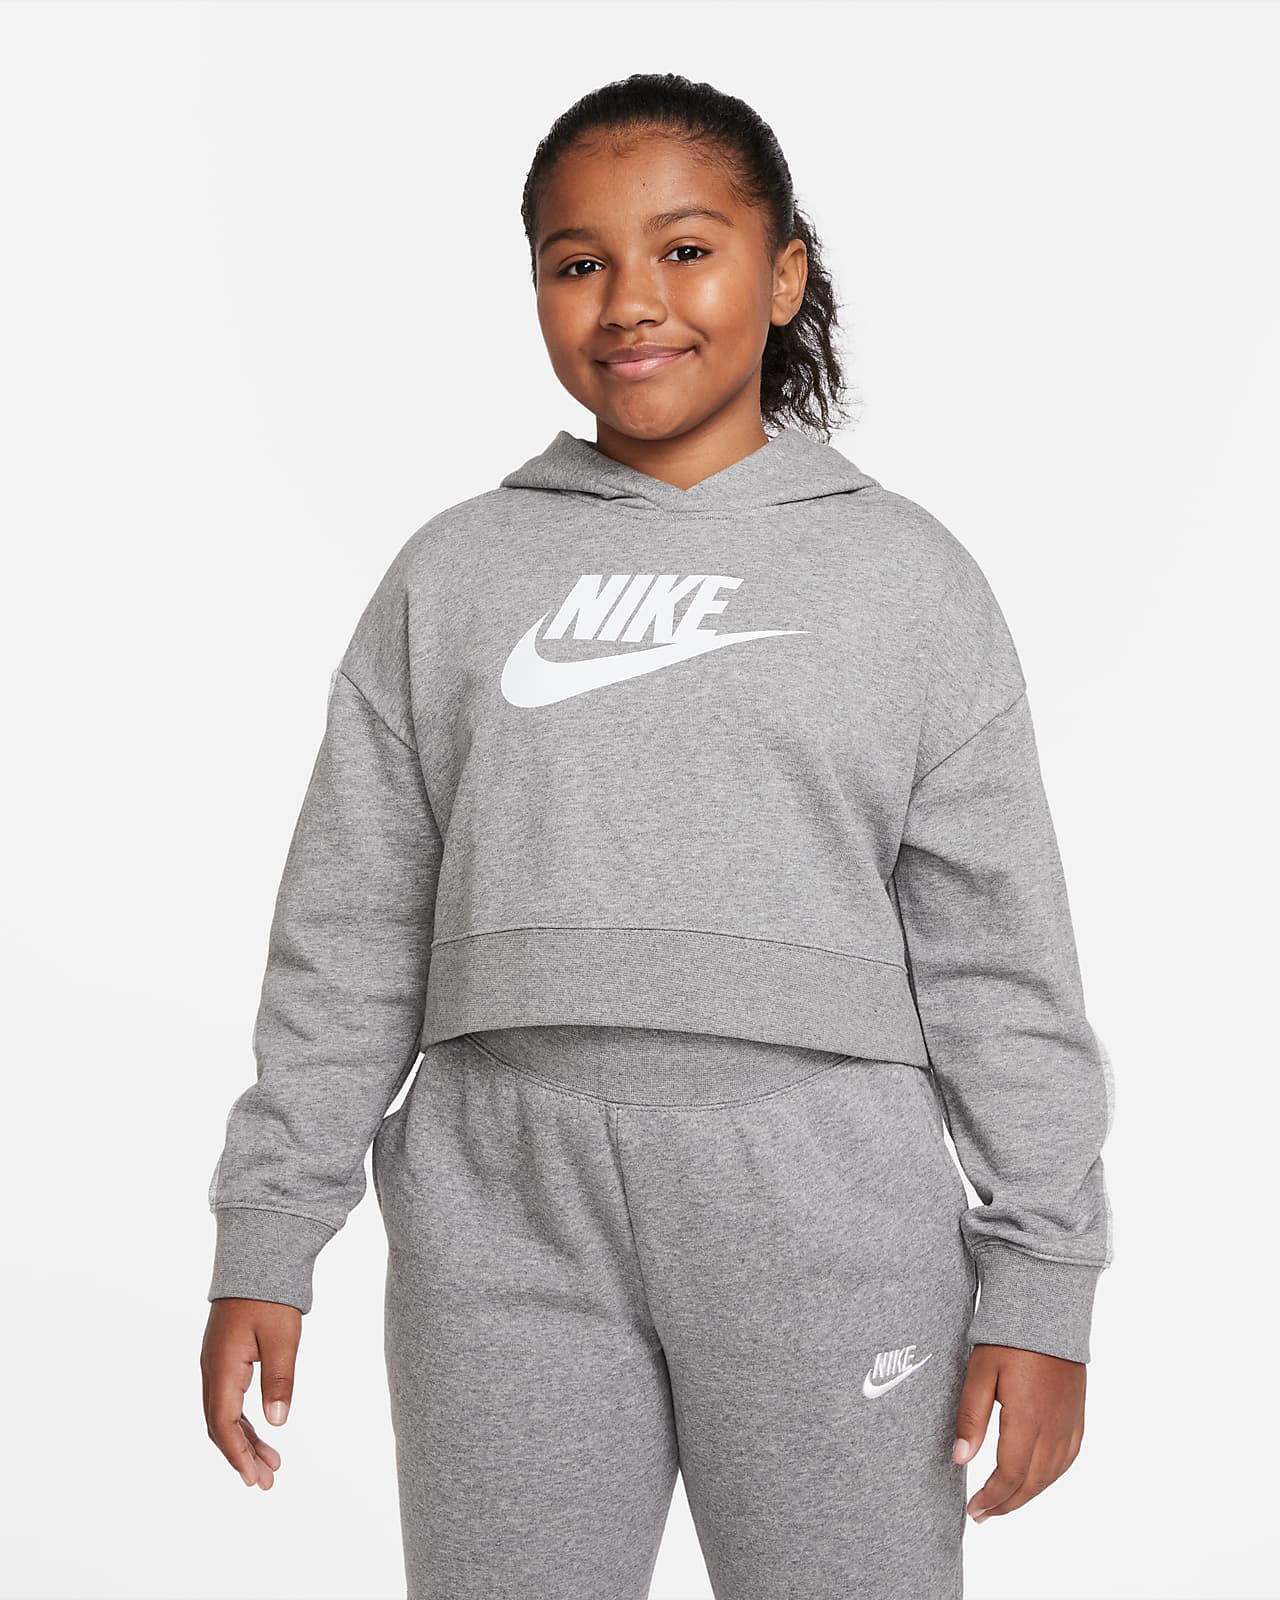 Nike Sportswear Club Older Kids' (Girls') French Terry Cropped Hoodie (Extended Size)